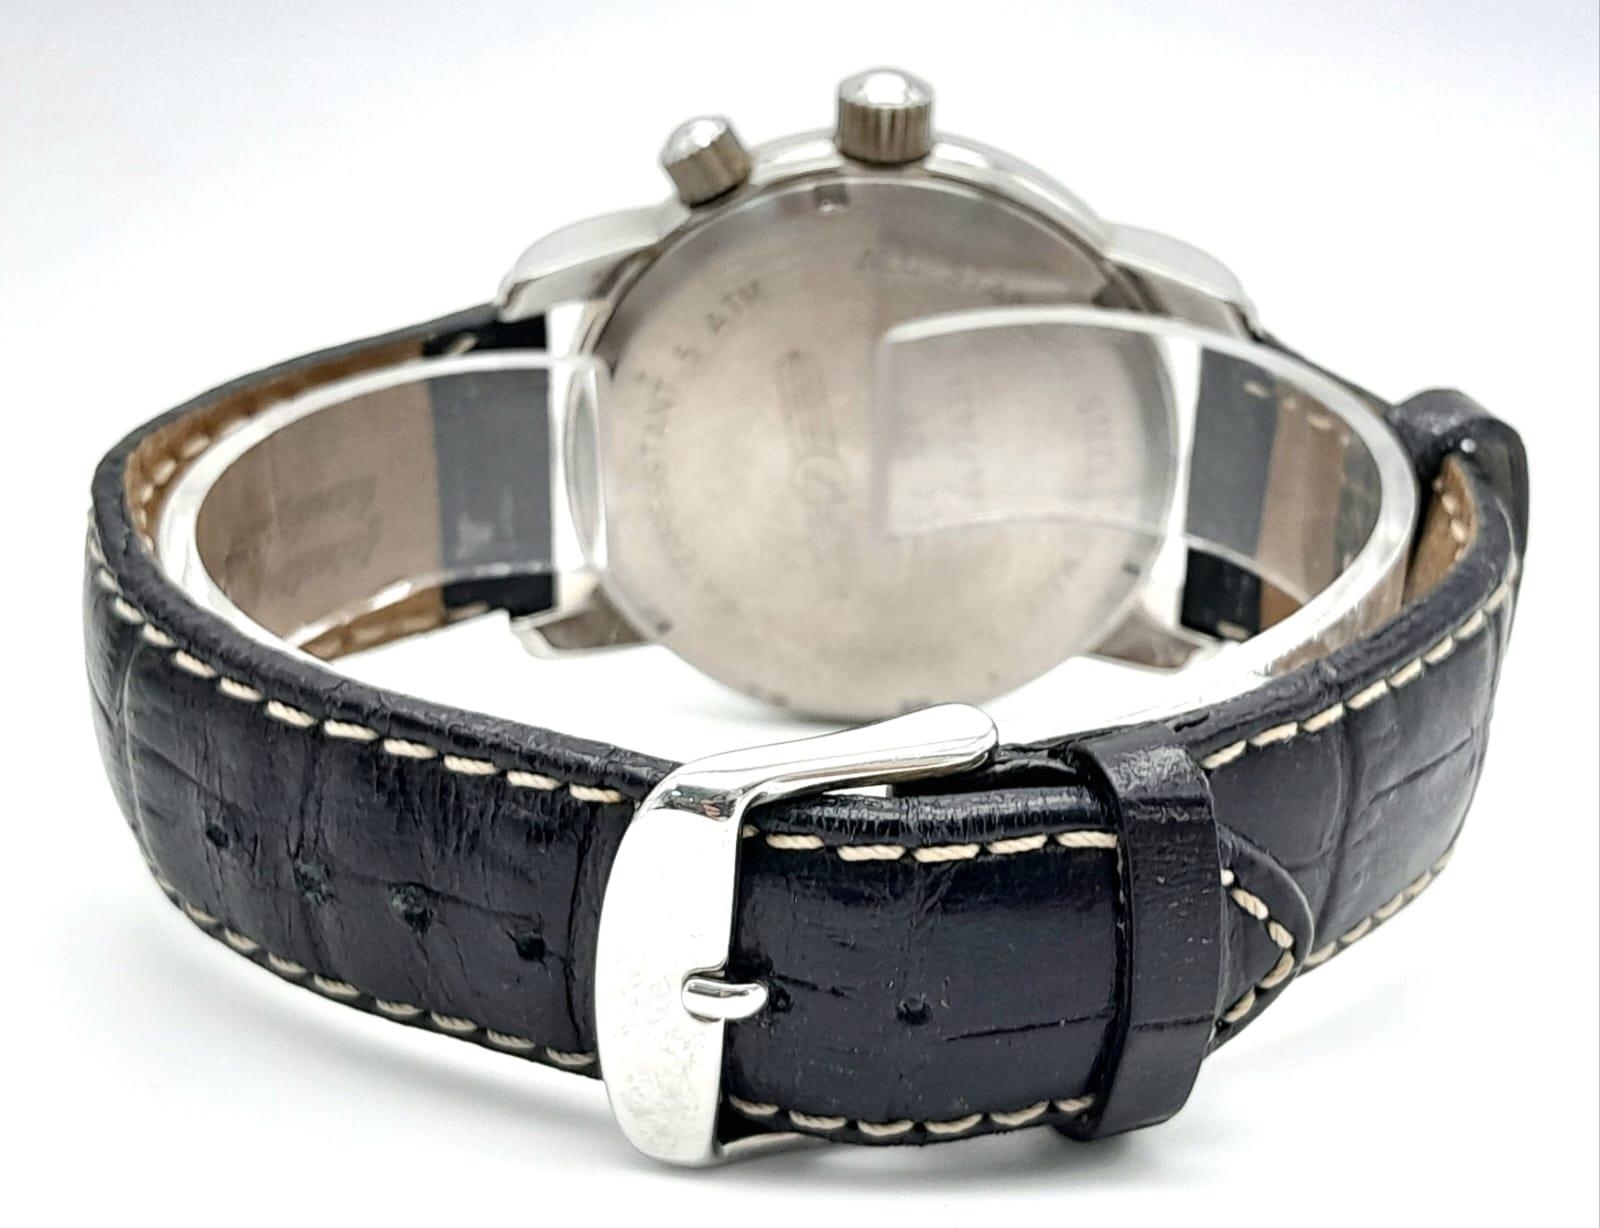 A German Made Zeppelin Dual Time Gents Quartz Watch. Black leather strap. Stainless steel case - - Image 4 of 7